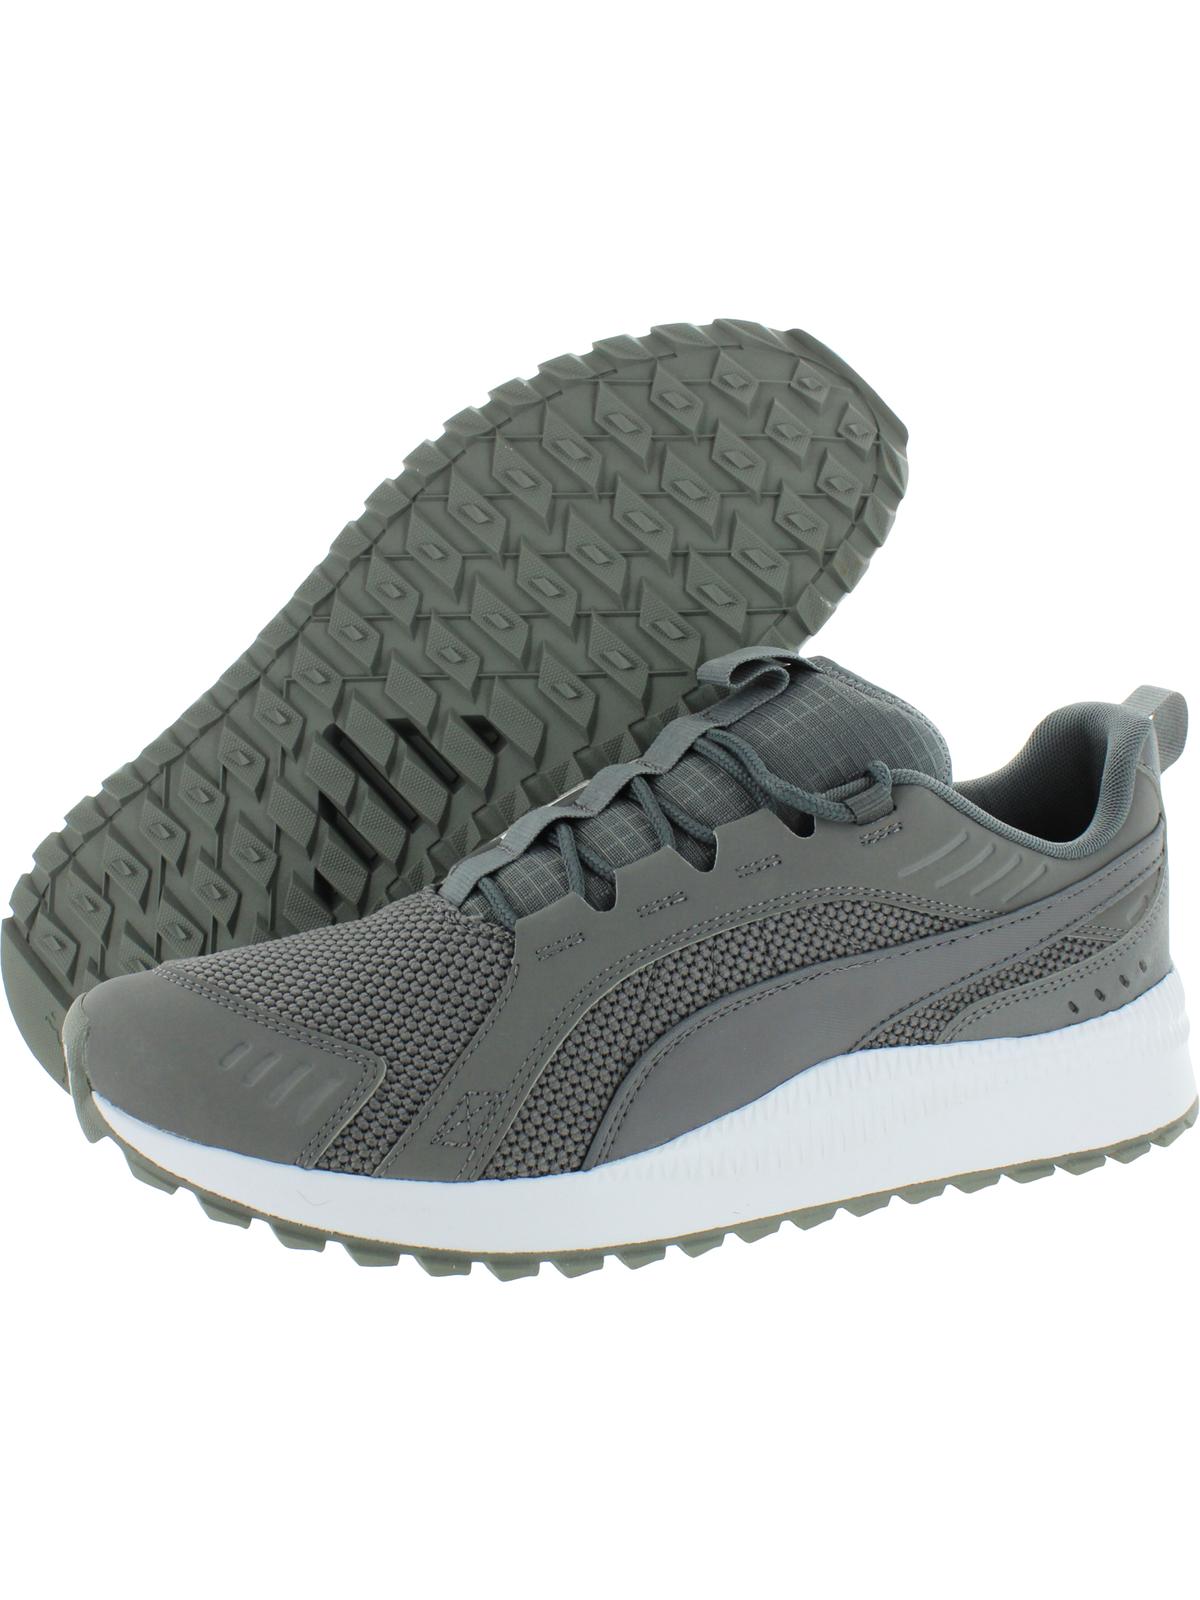 Puma Mens Pacer Next R Fitness Workout Athletic Shoes Gray 9.5 Medium (D) - image 2 of 2